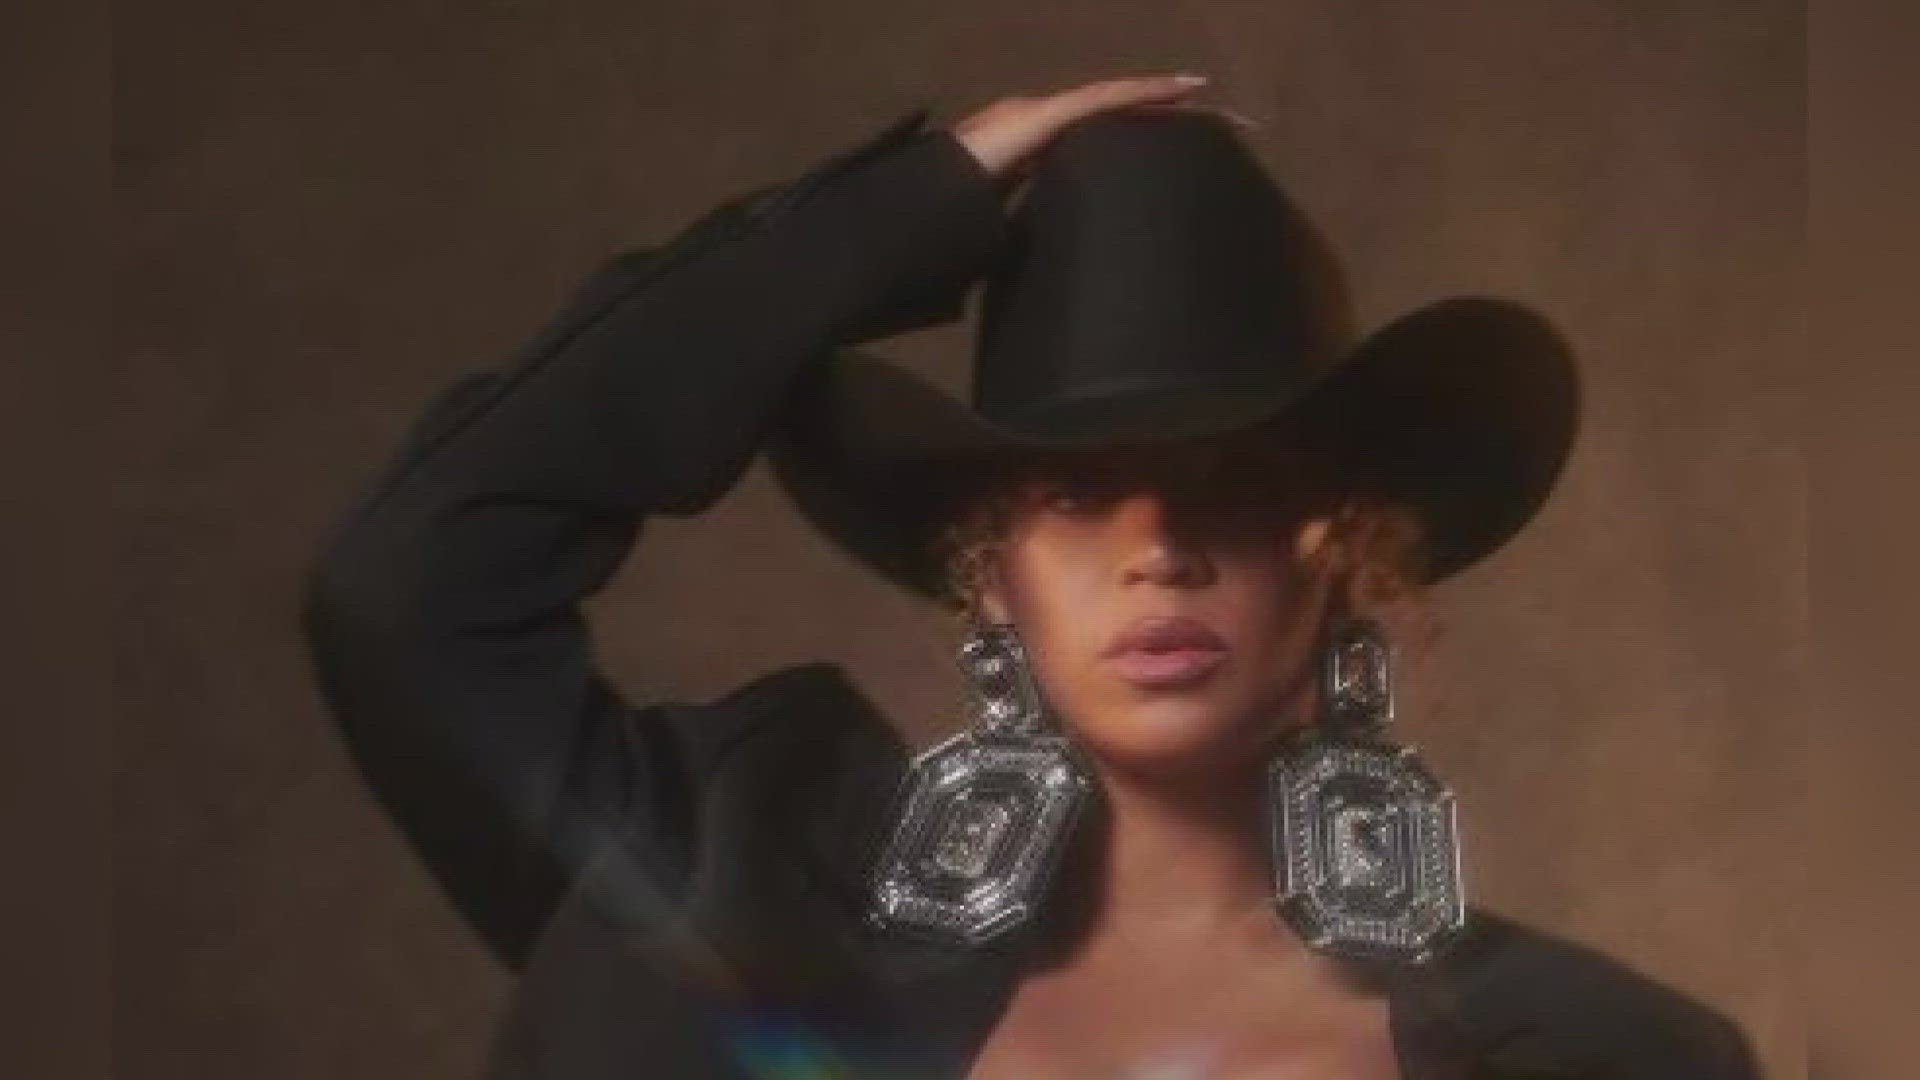 Her latest album "Cowboy Carter" is Beyonce's breakthrough album in country music. Her single from the album "Texas Hold-Em" has 128 million streams on Spotify.